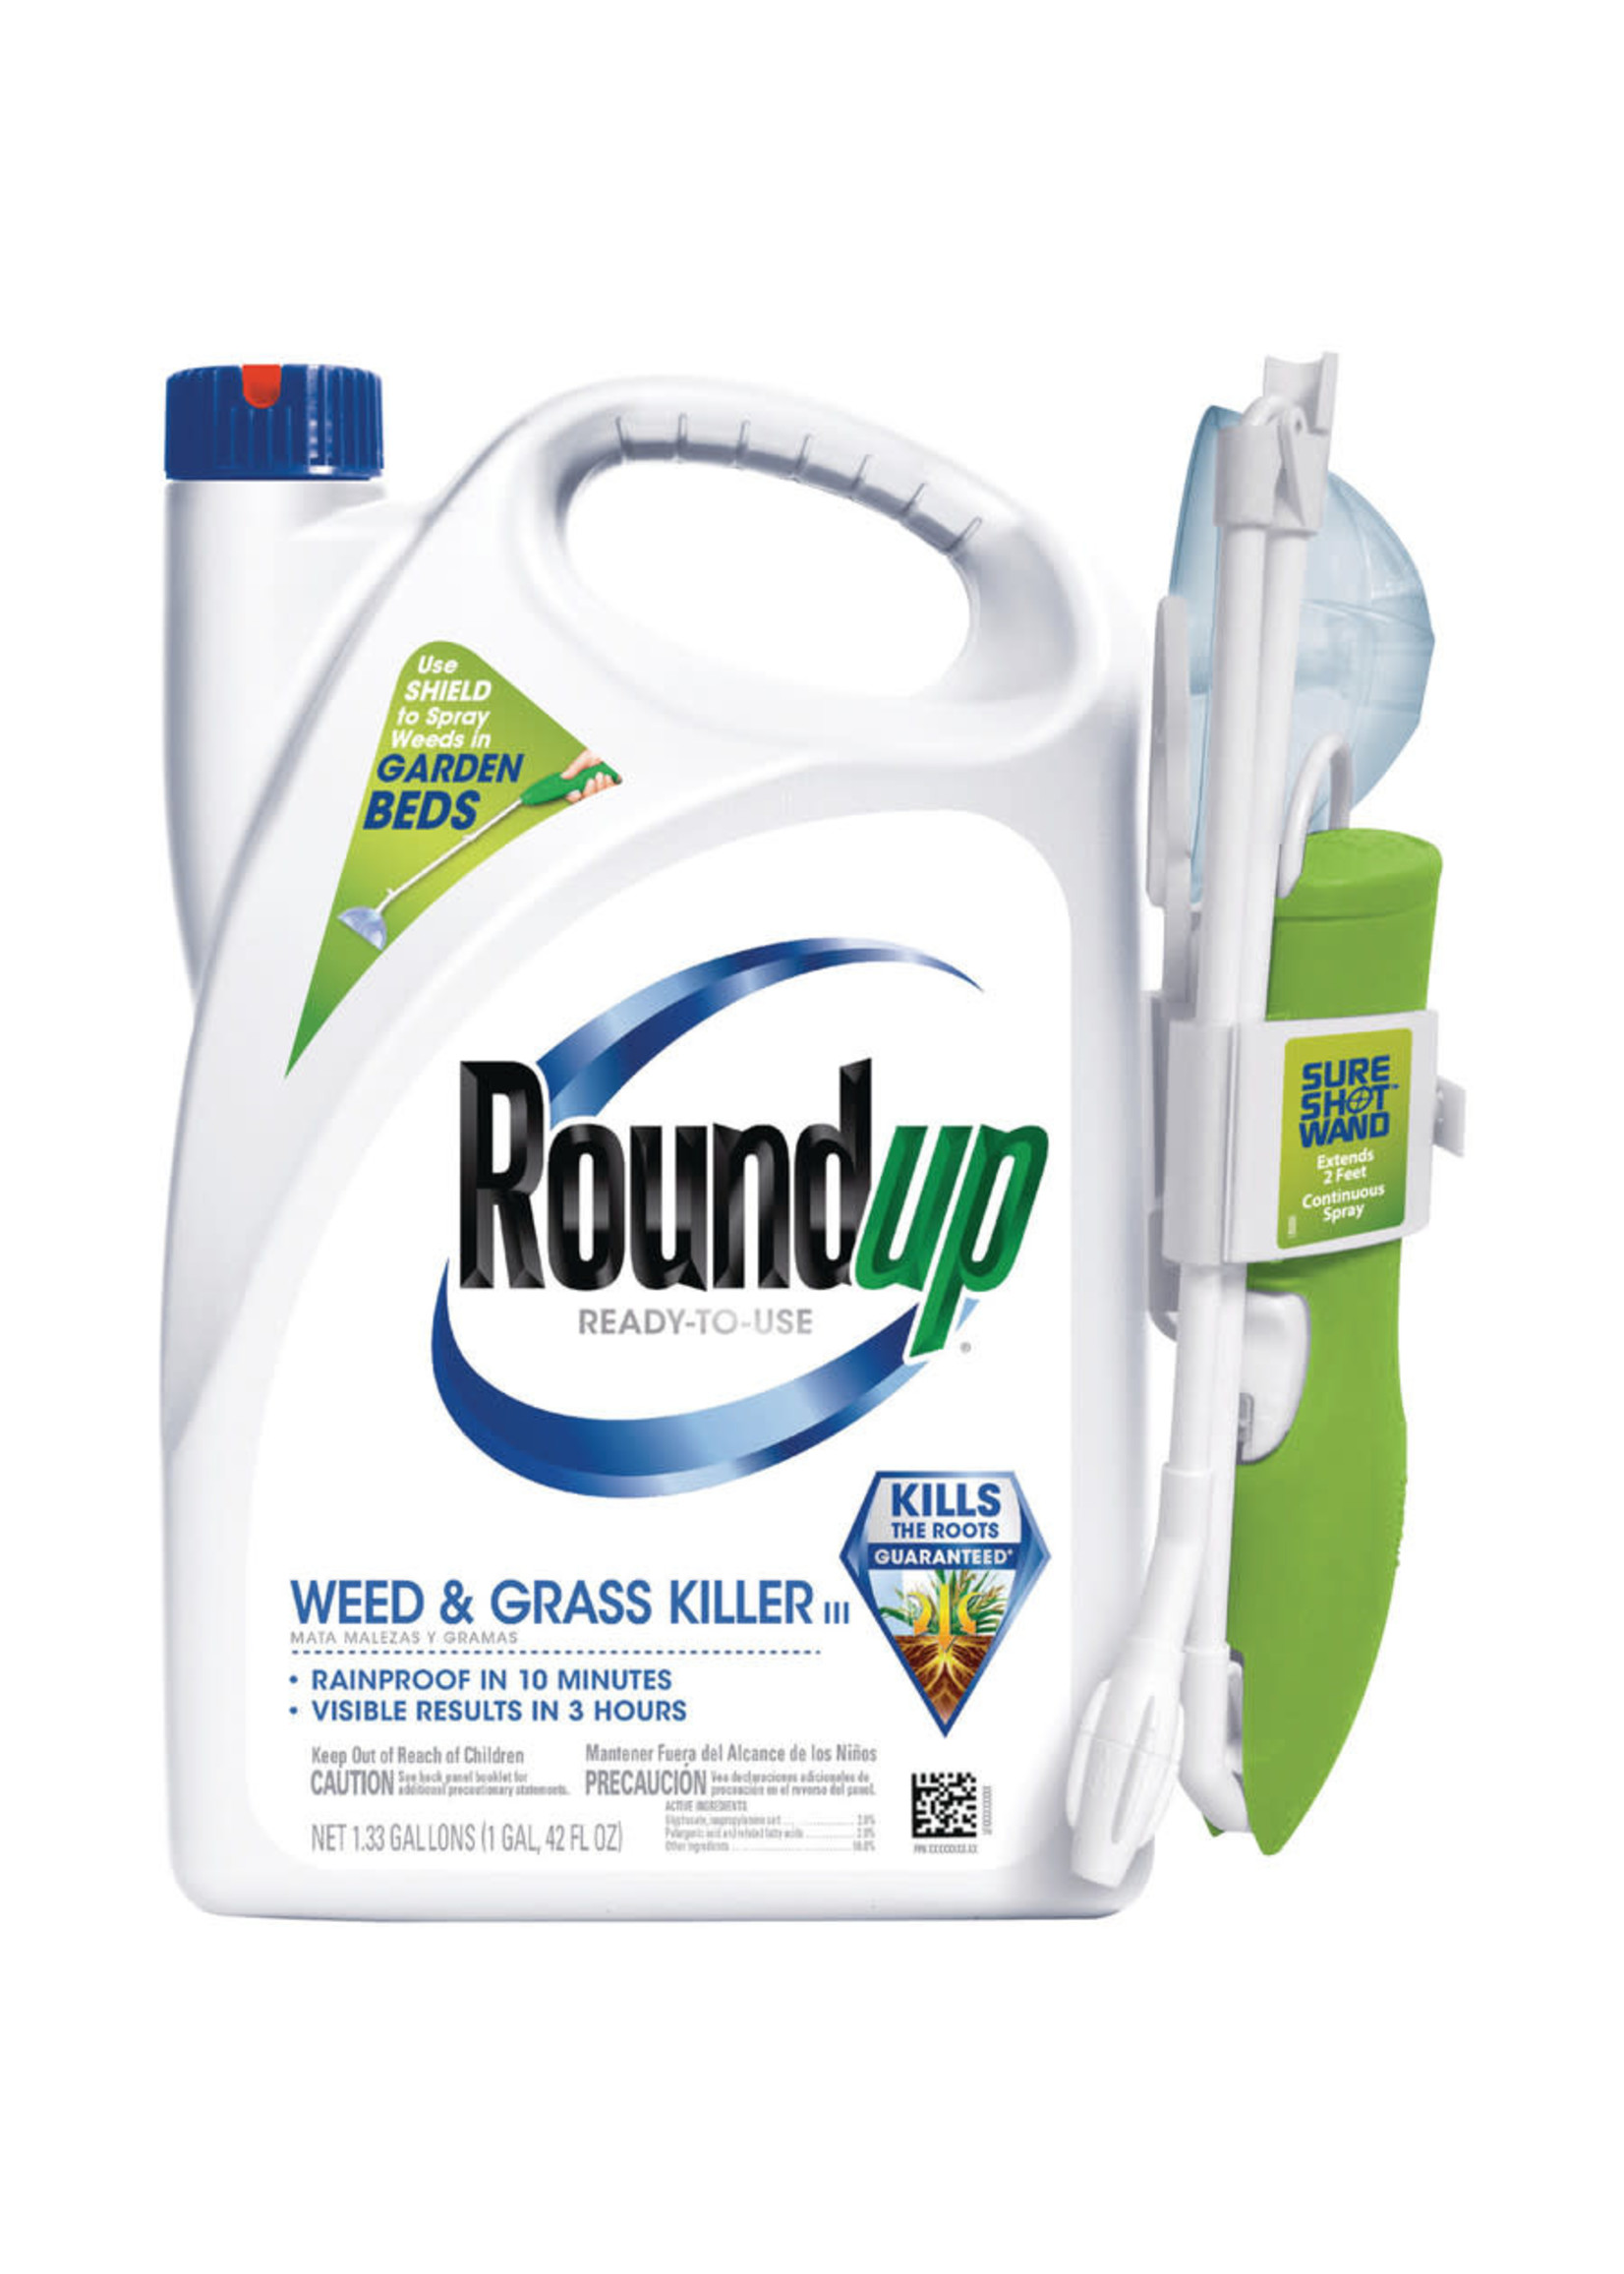 Roundup Ready-To-Use Weed & Grass Killer